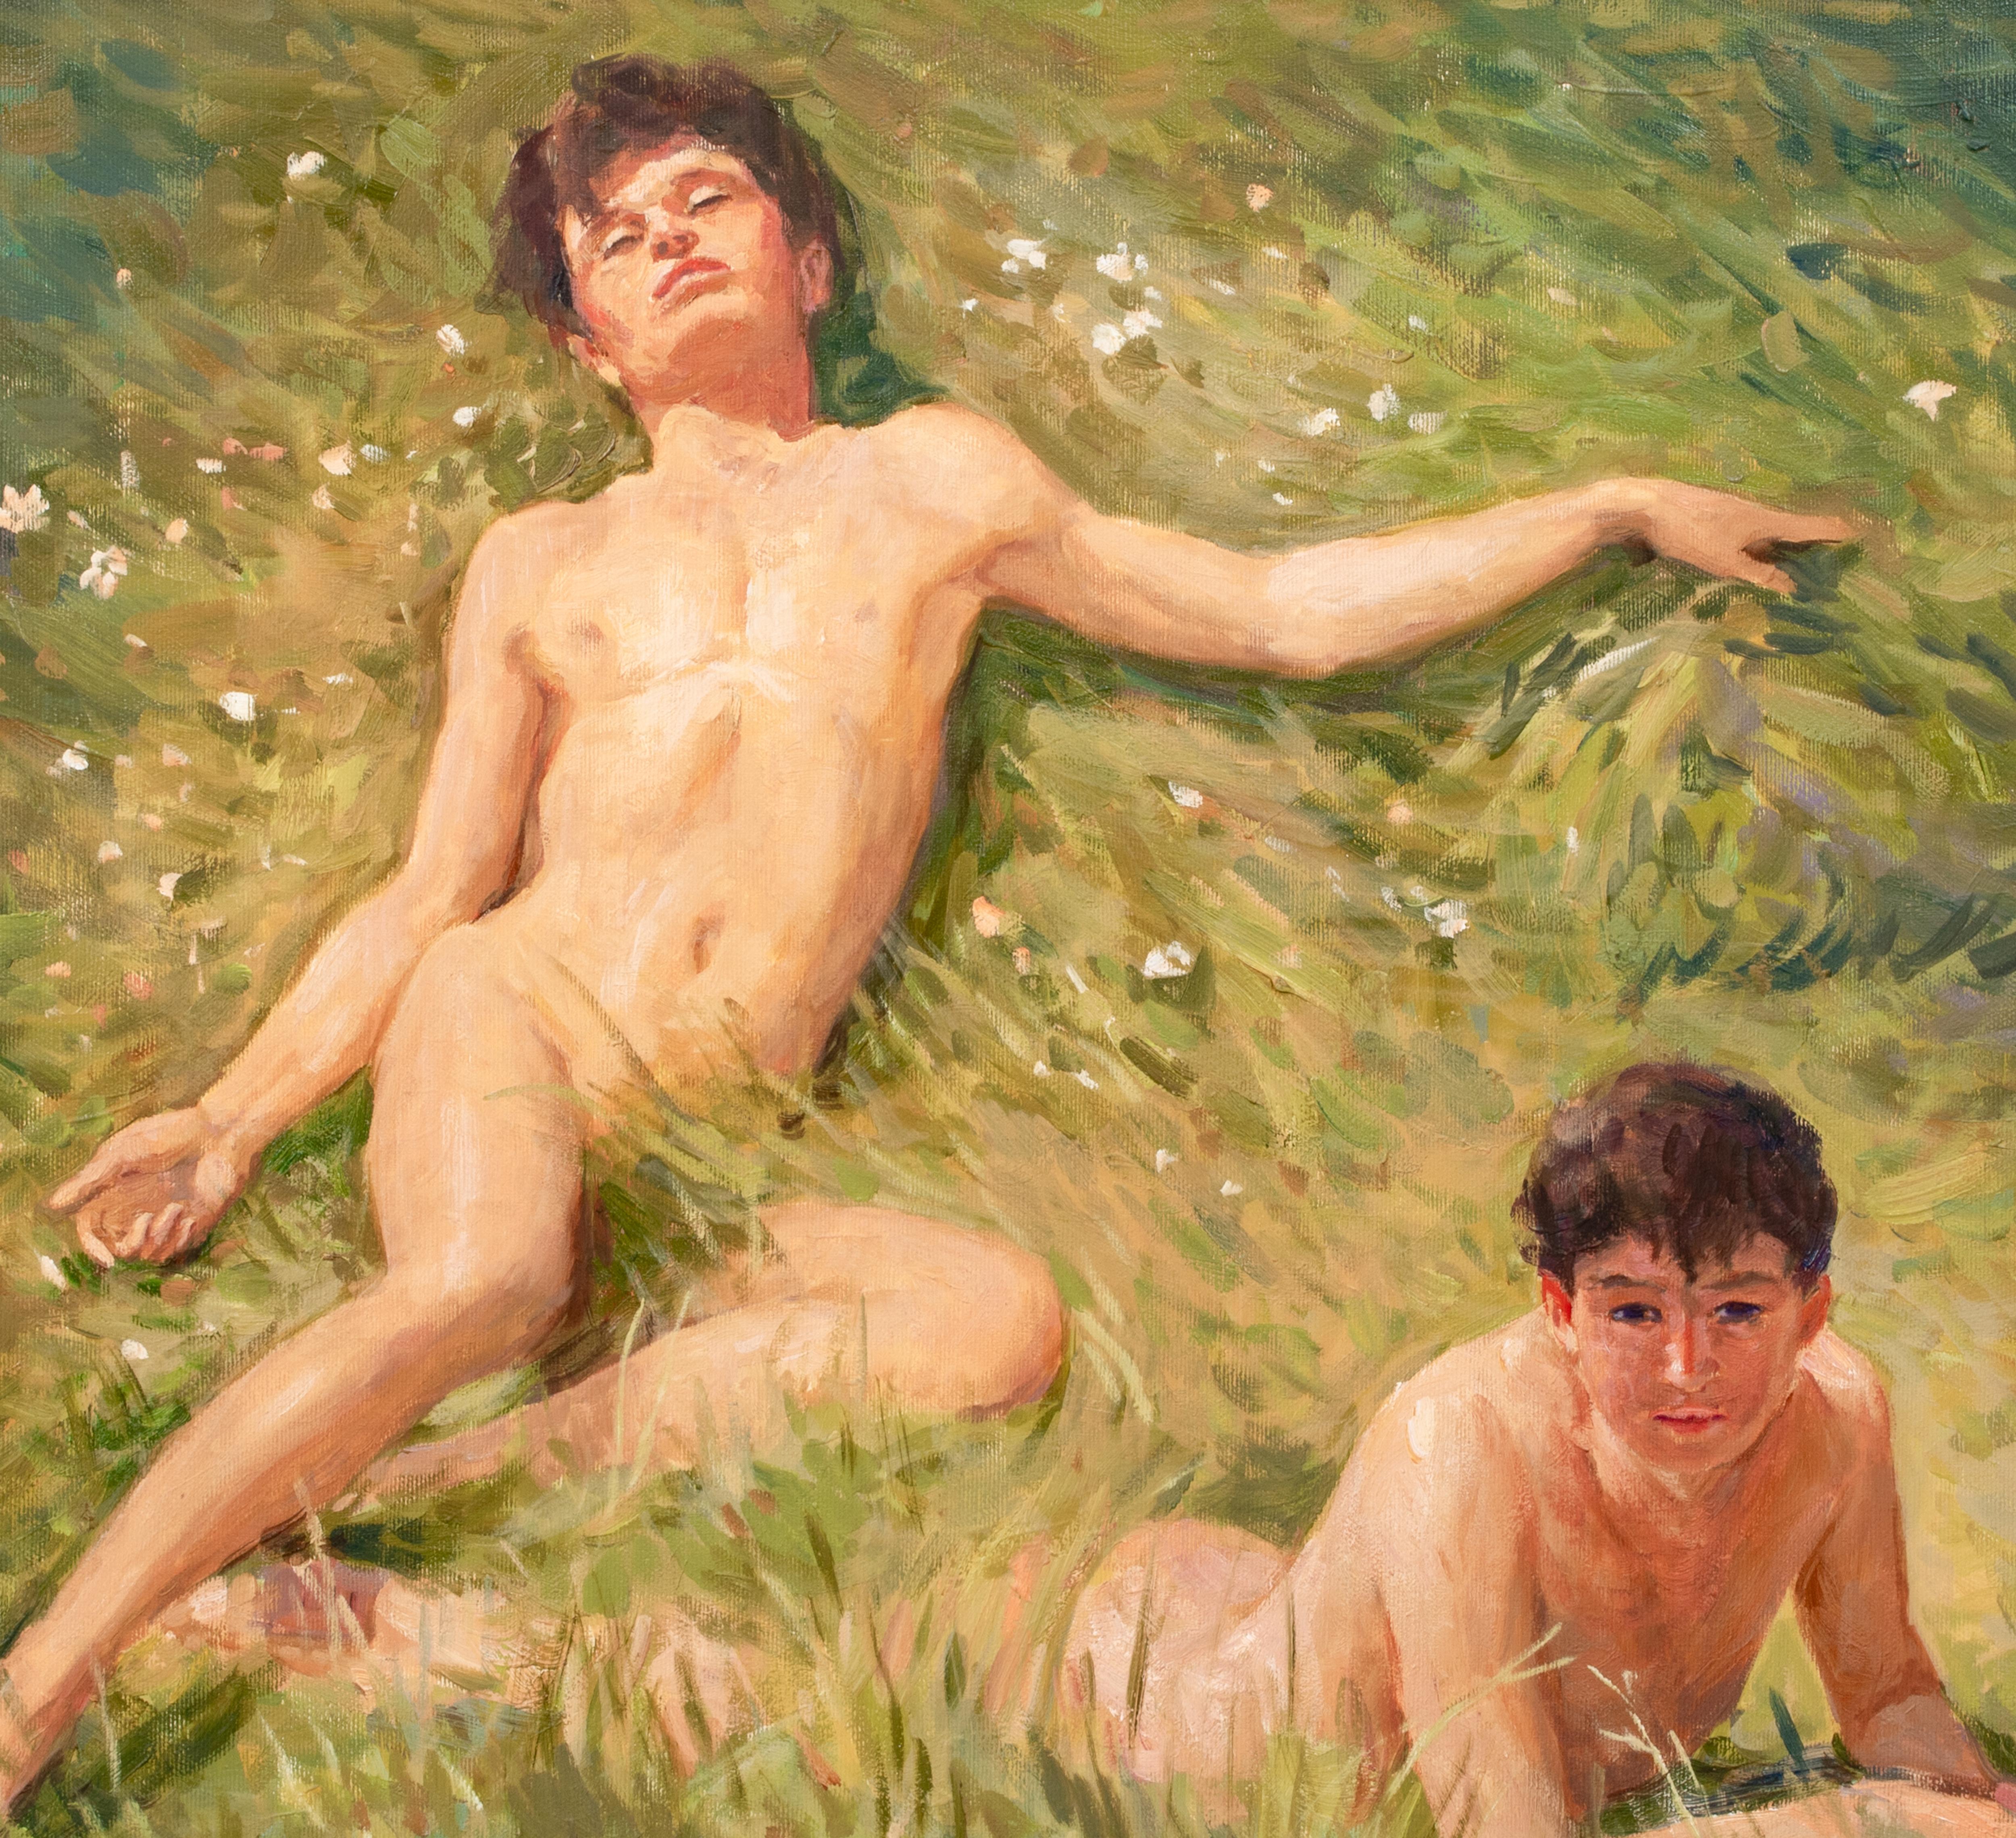 Nude Boys In The Summer Grass   For Sale 2